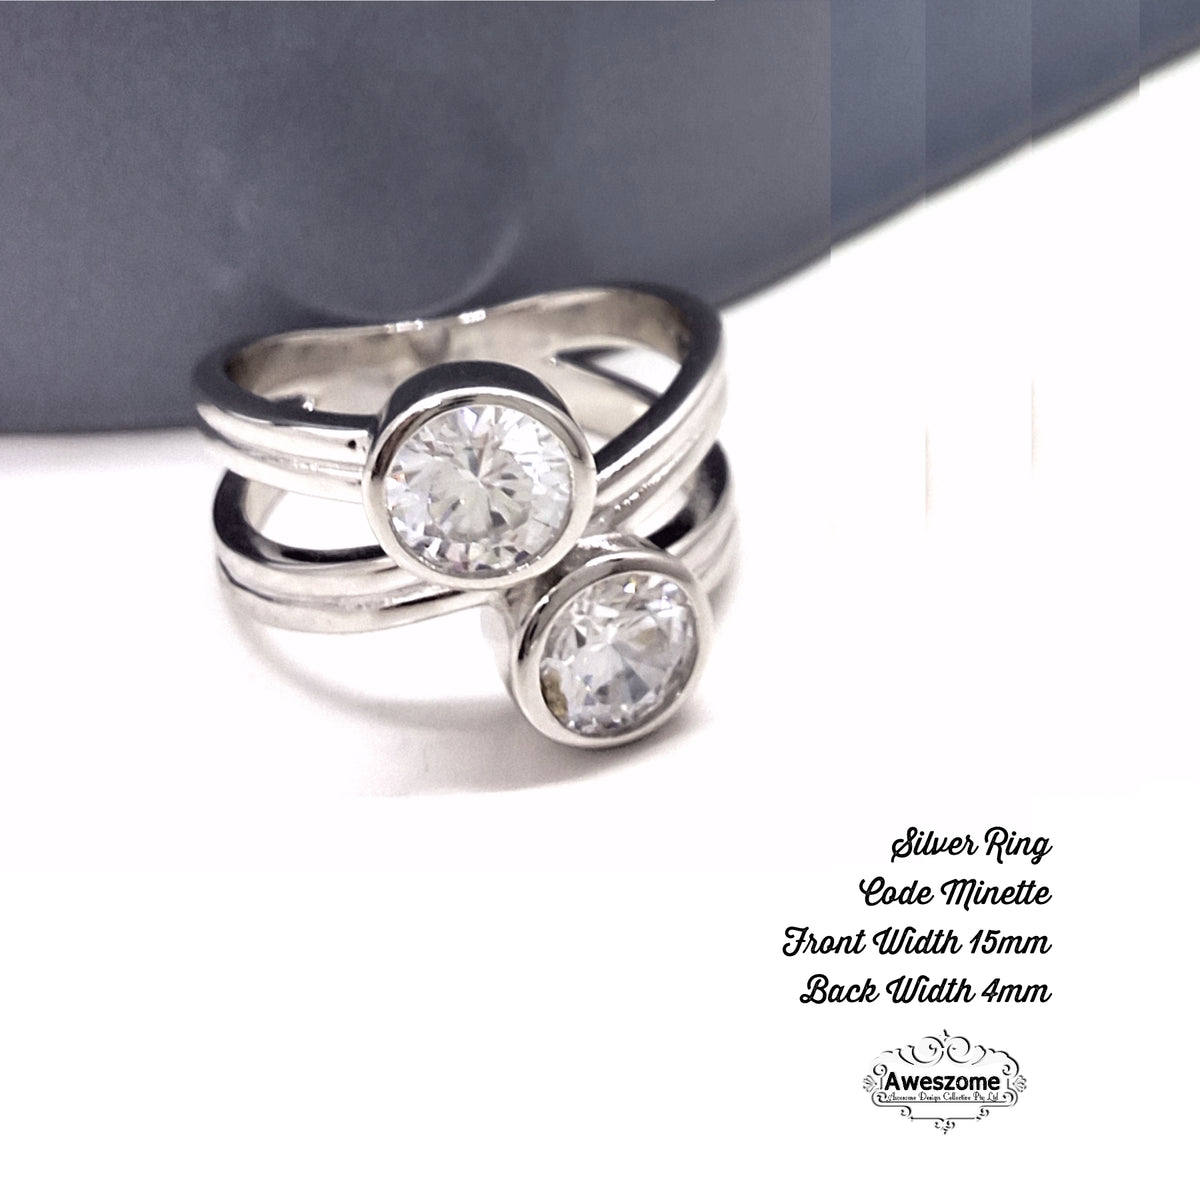 Silver Ring Minette